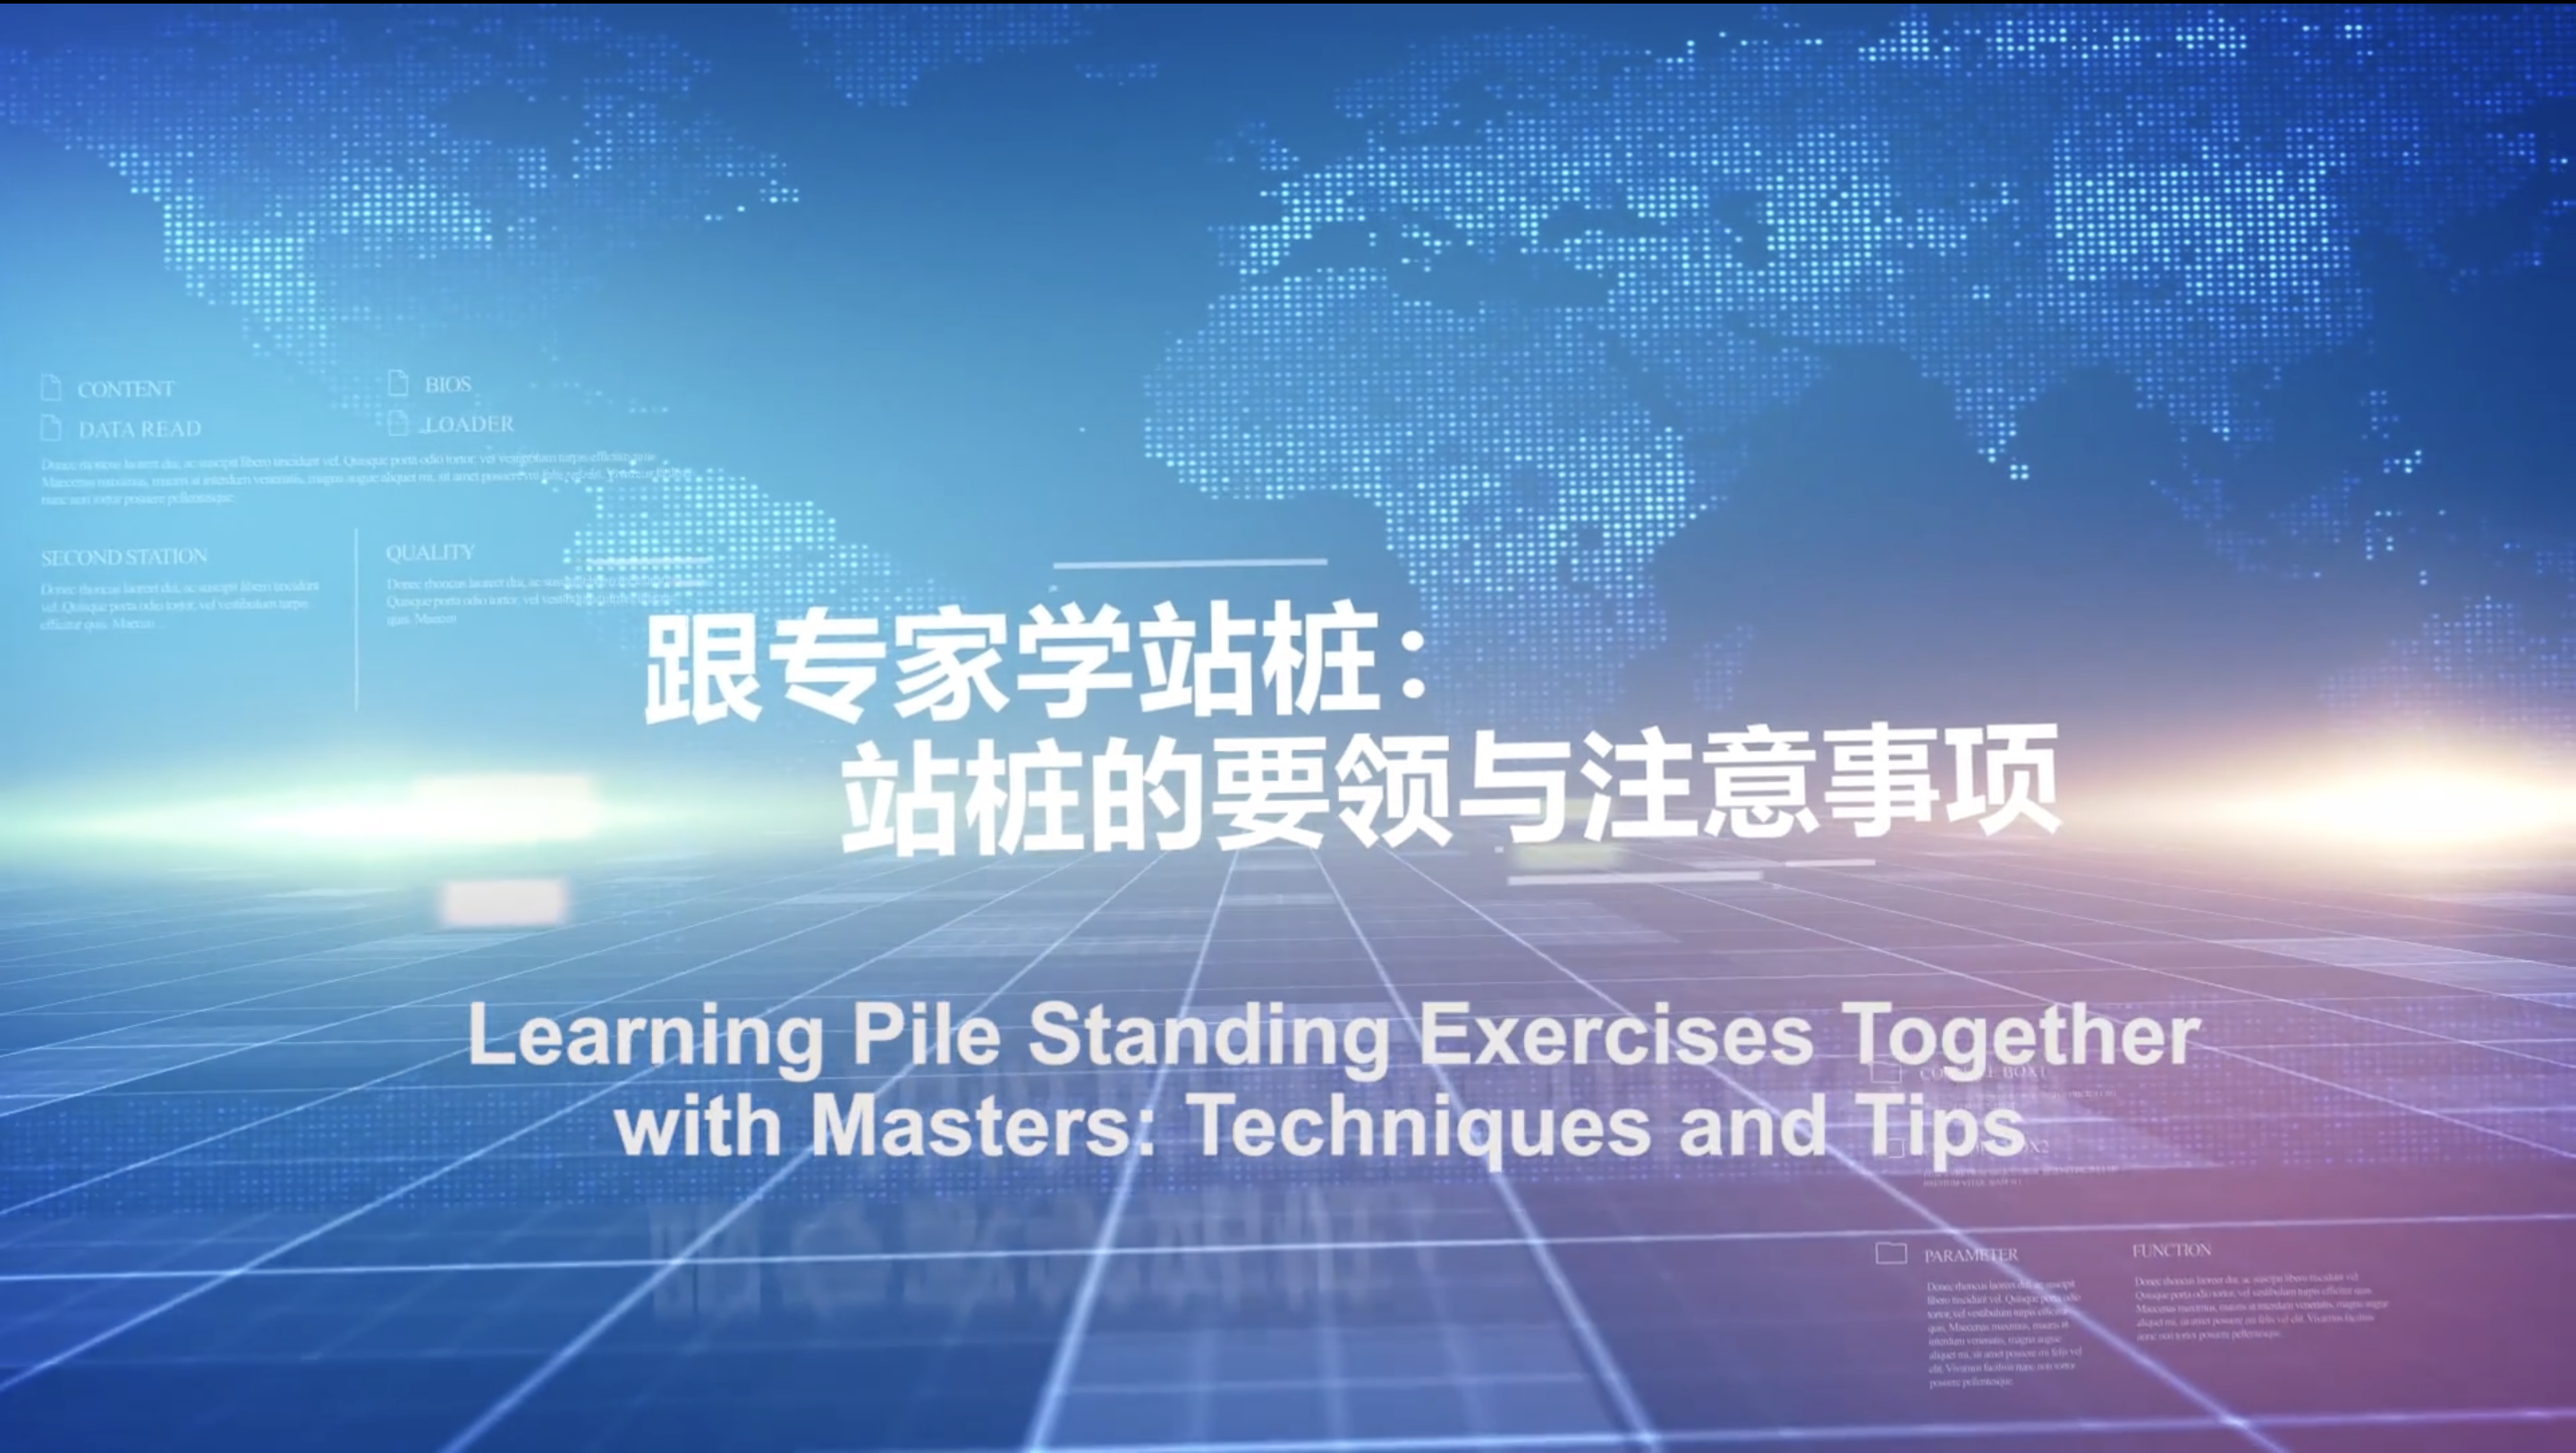 Cultural Experience Learning Pile Standing Exercises Together with Masters - Techniques and Tips